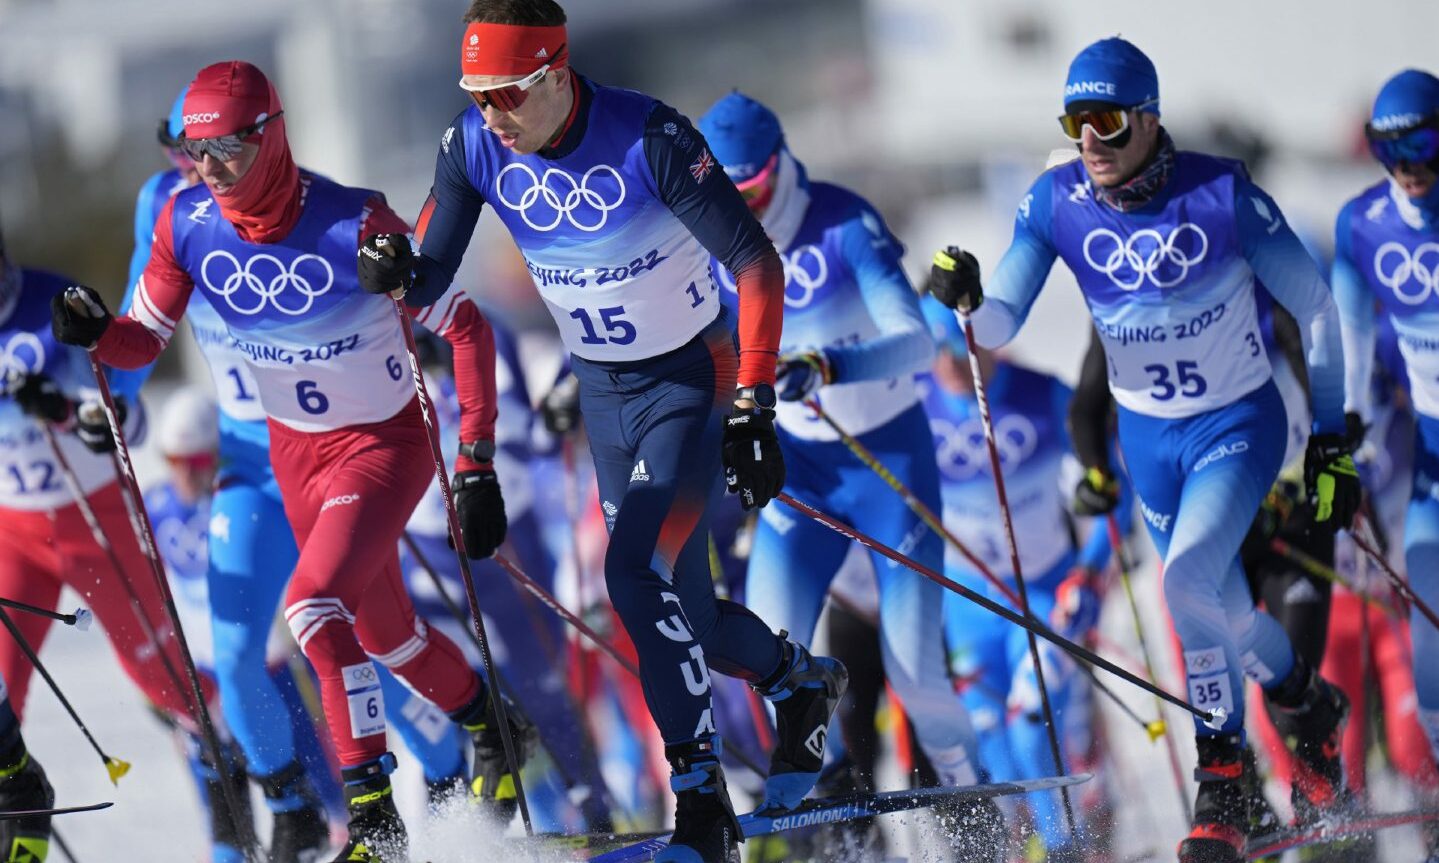 Britain's Andrew Musgrave (15) competes during the men's 15km + 15km skiathlon cross-country skiing competition at the 2022 Winter Olympics.